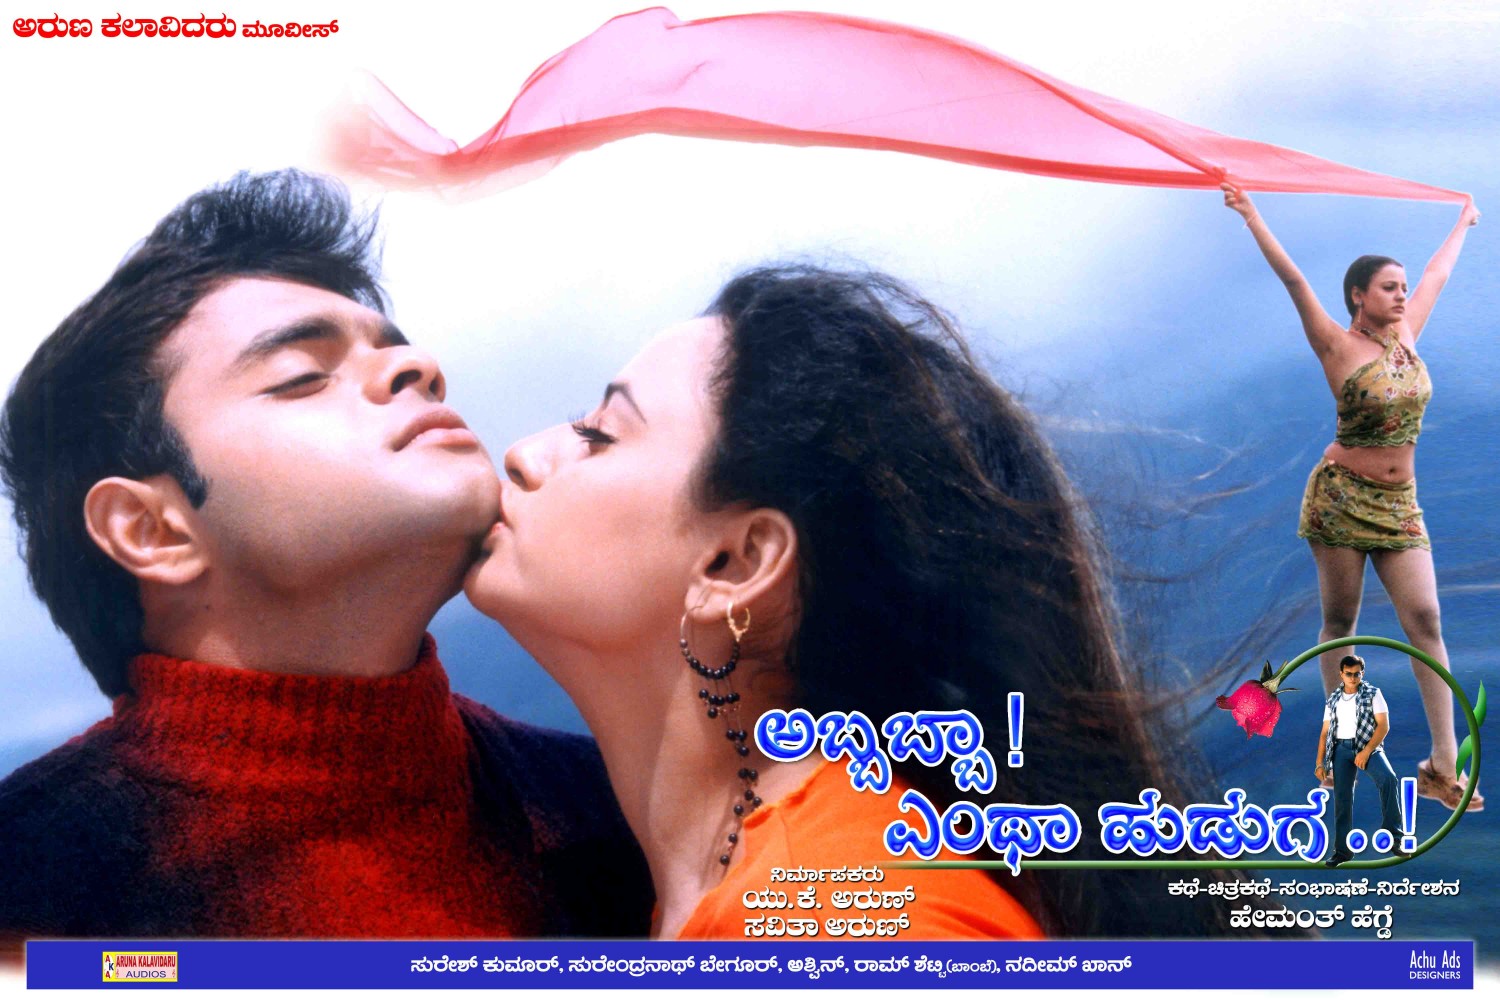 Extra Large Movie Poster Image for Abba Abba Yentha Huduga (#1 of 2)